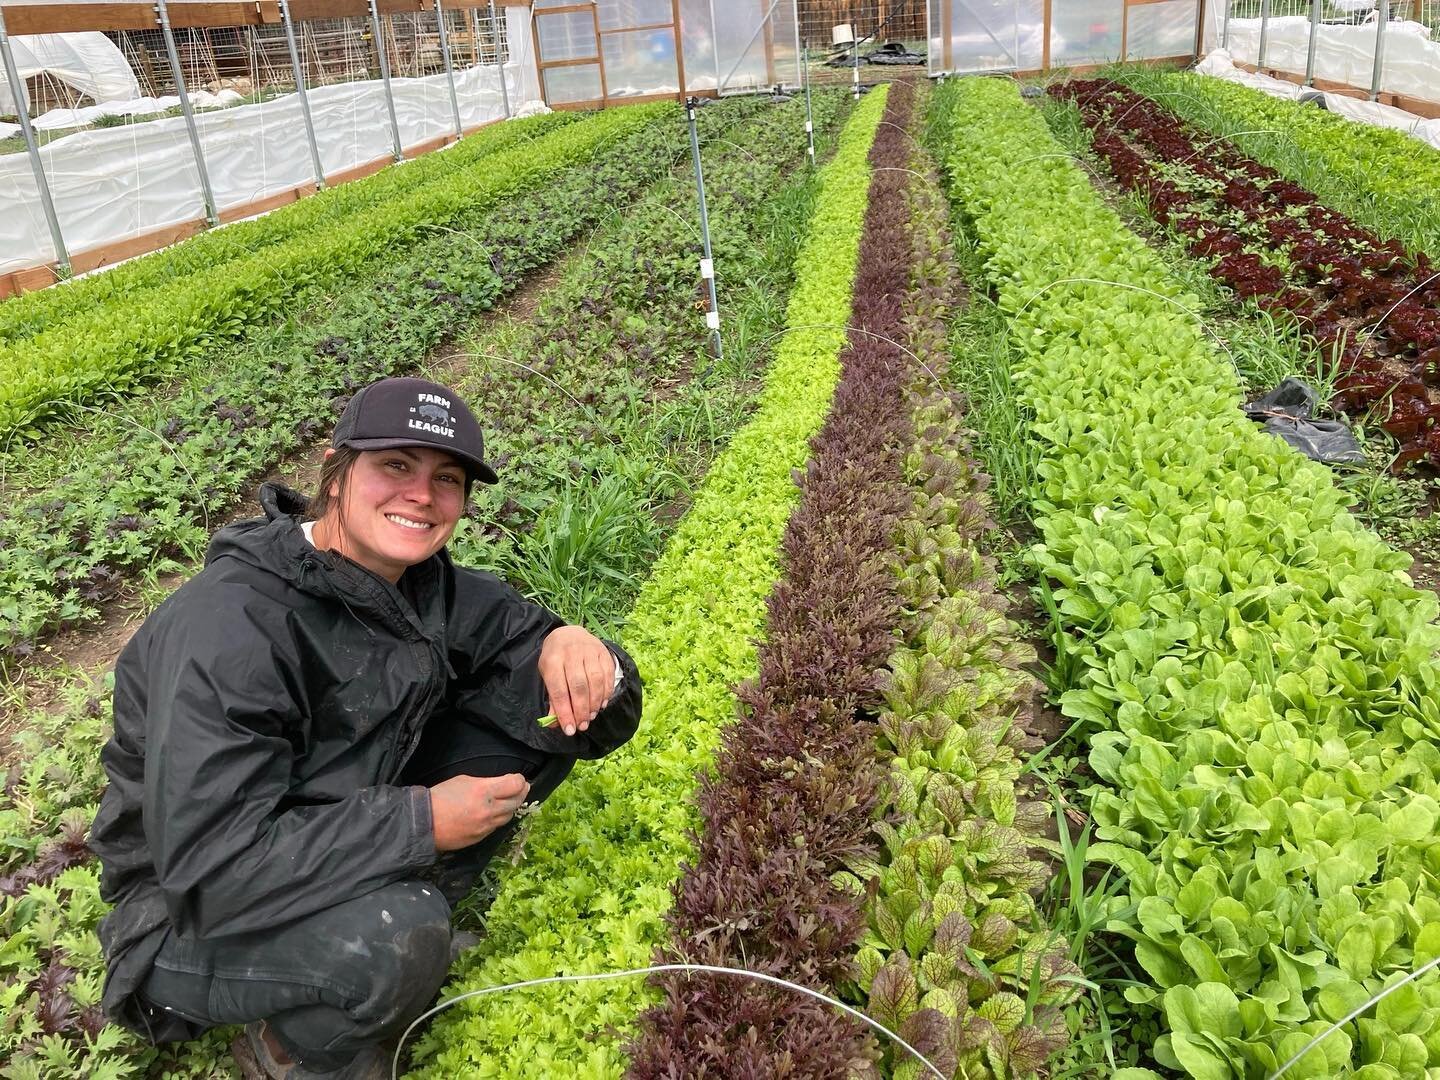 Interested in joining a CSA this year? In joining our CSA, not only do you receive a diverse box of fresh, local vegetables each week at an affordable price, you also gain a personal connection with the farmers who grow your food, know exactly where 